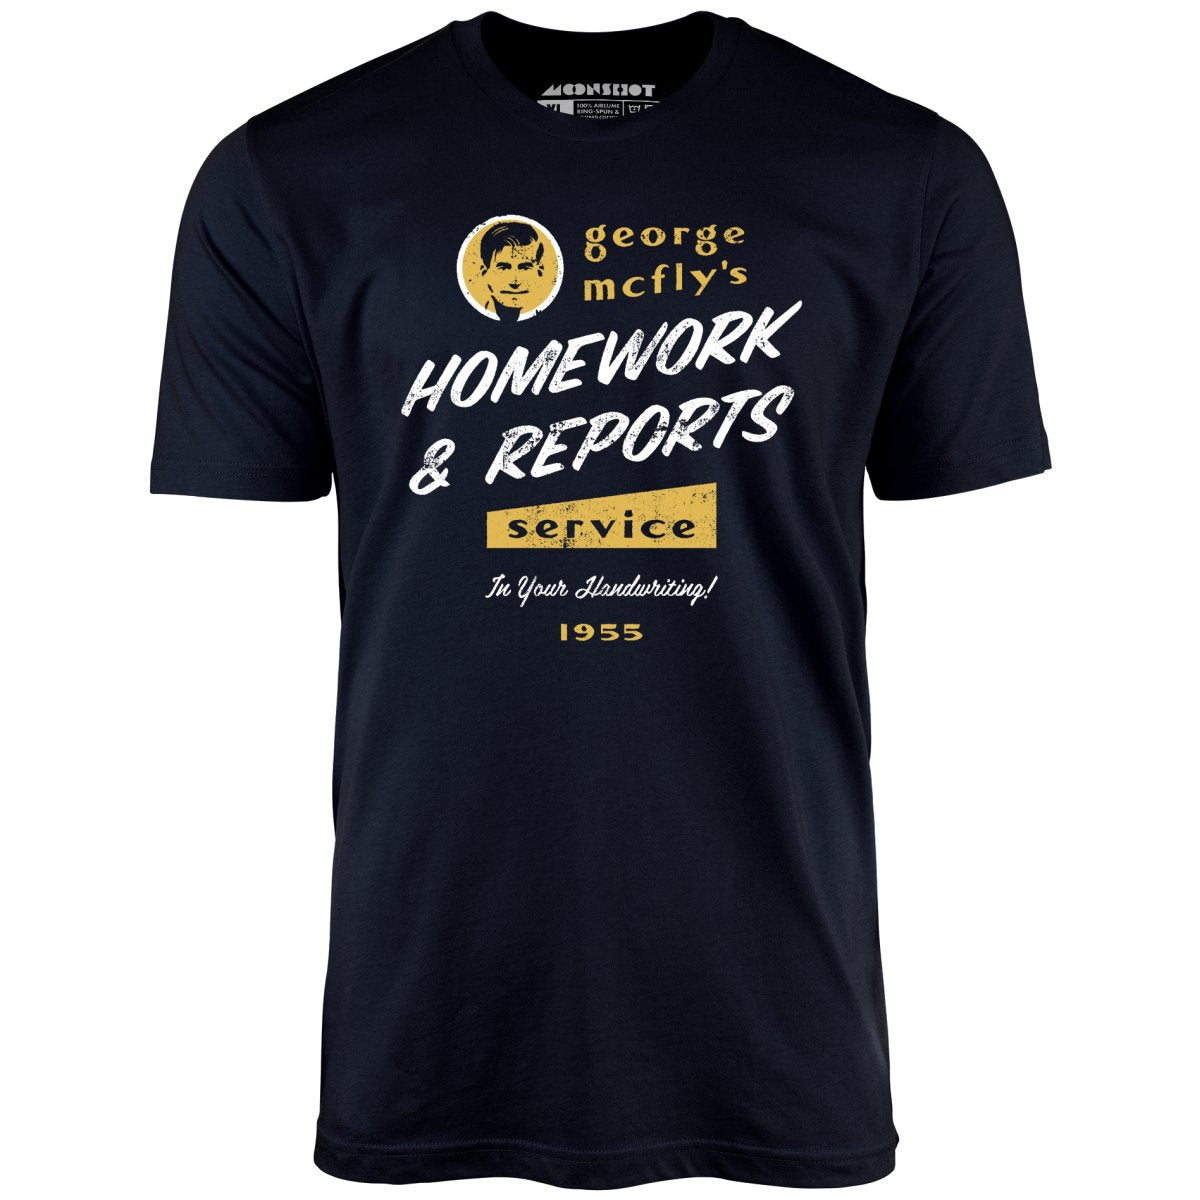 George McFly's Homework & Reports Service - Unisex T-Shirt